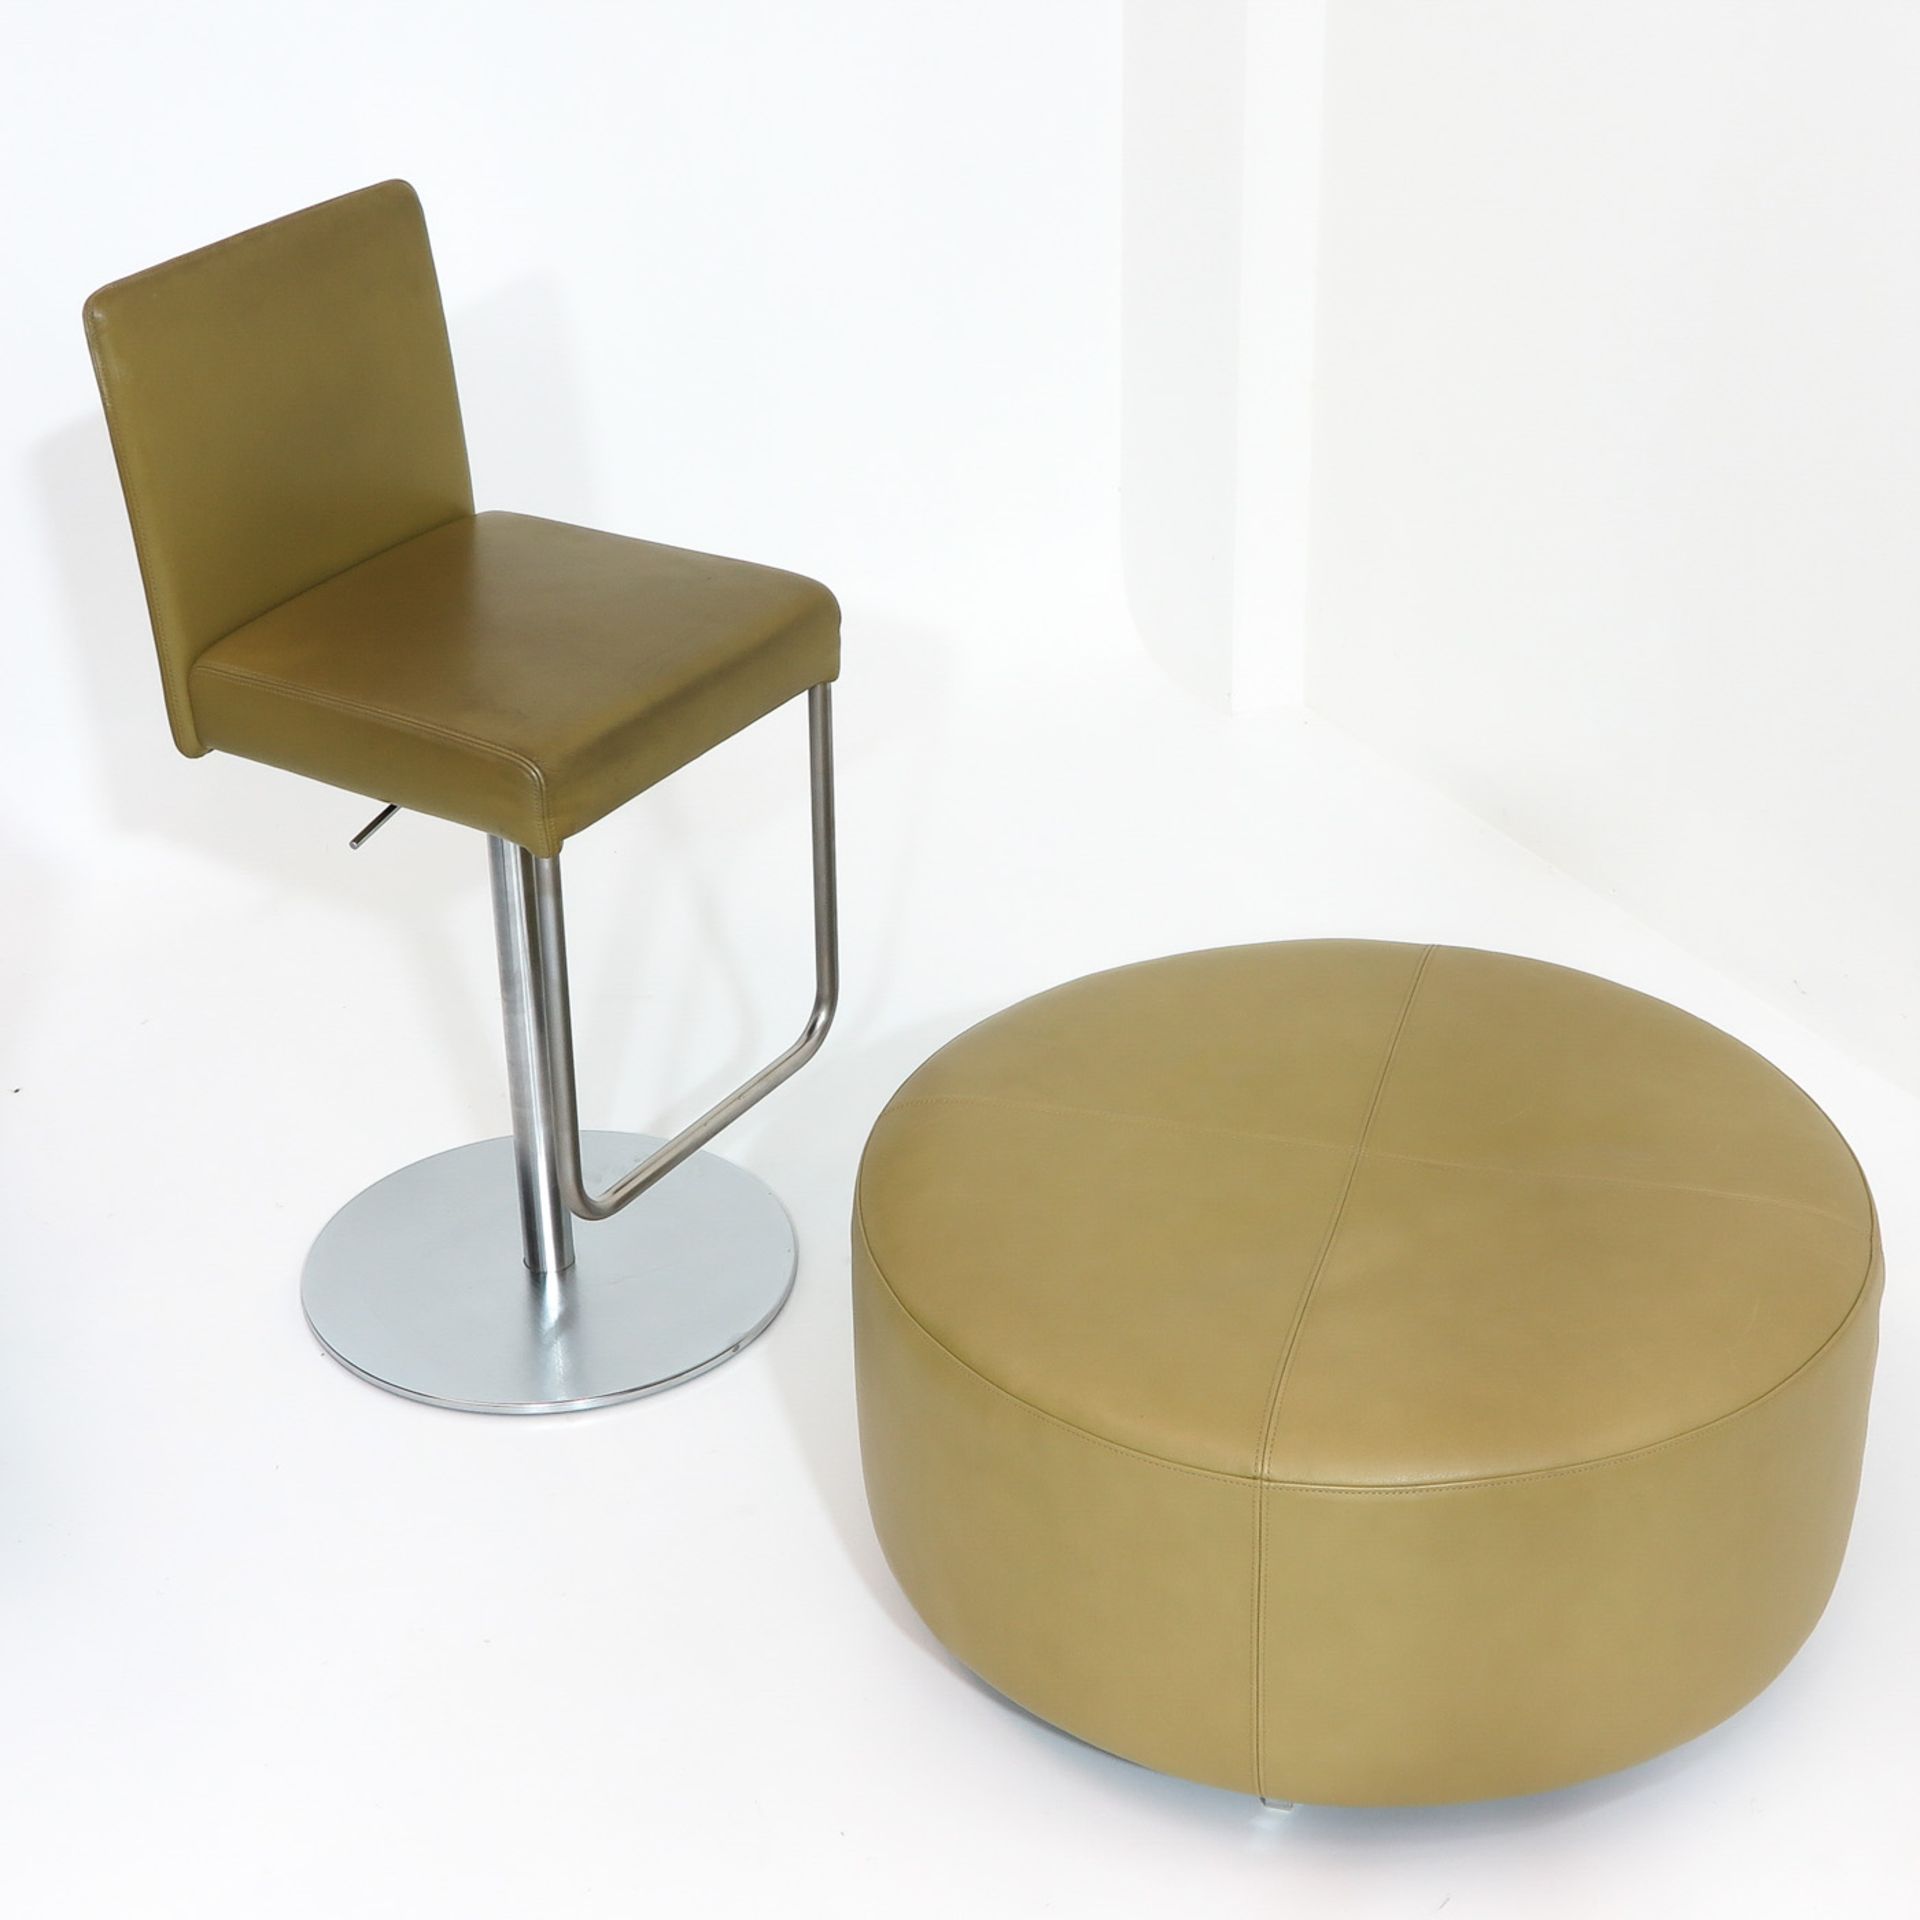 A Walter Knoll Design Table with Chairs and Barstools - Image 2 of 3